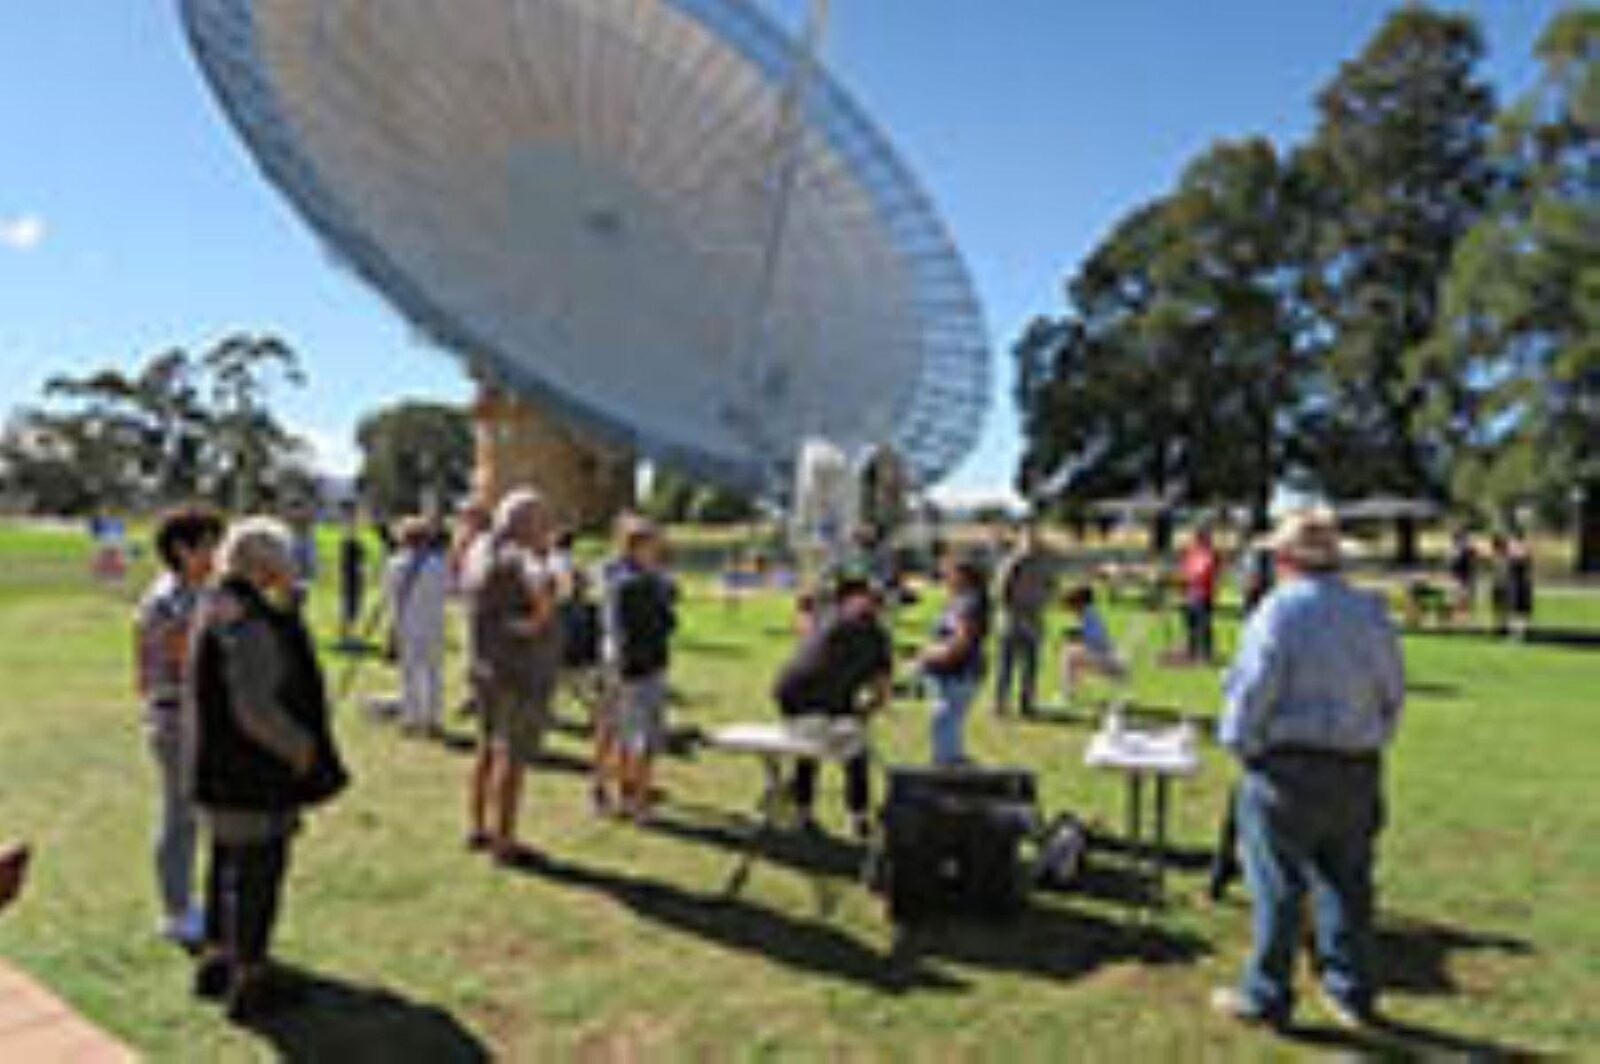 Daytime astronomy viewing at Astrofest